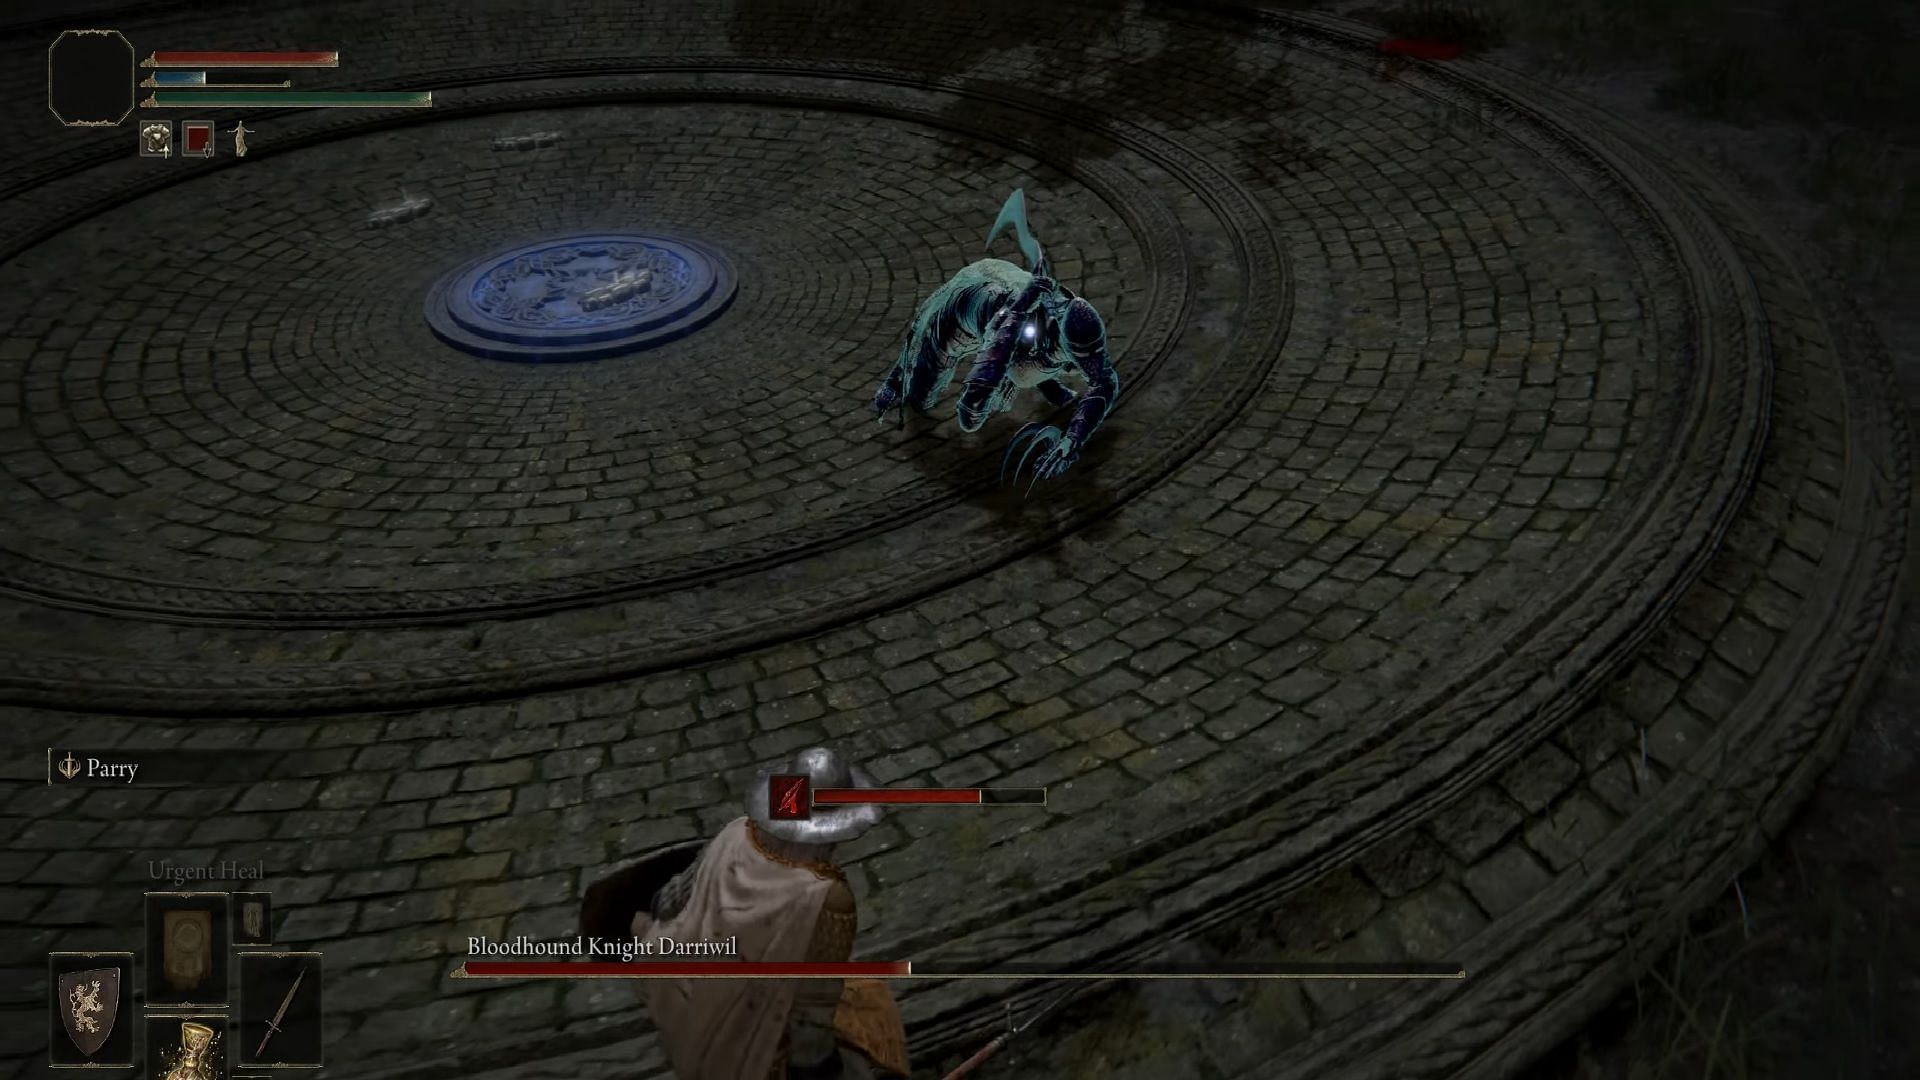 Bloodhound Knight Darriwill carries the Bloodhound&#039;s Fang (Image via Xdarkp/YouTube)